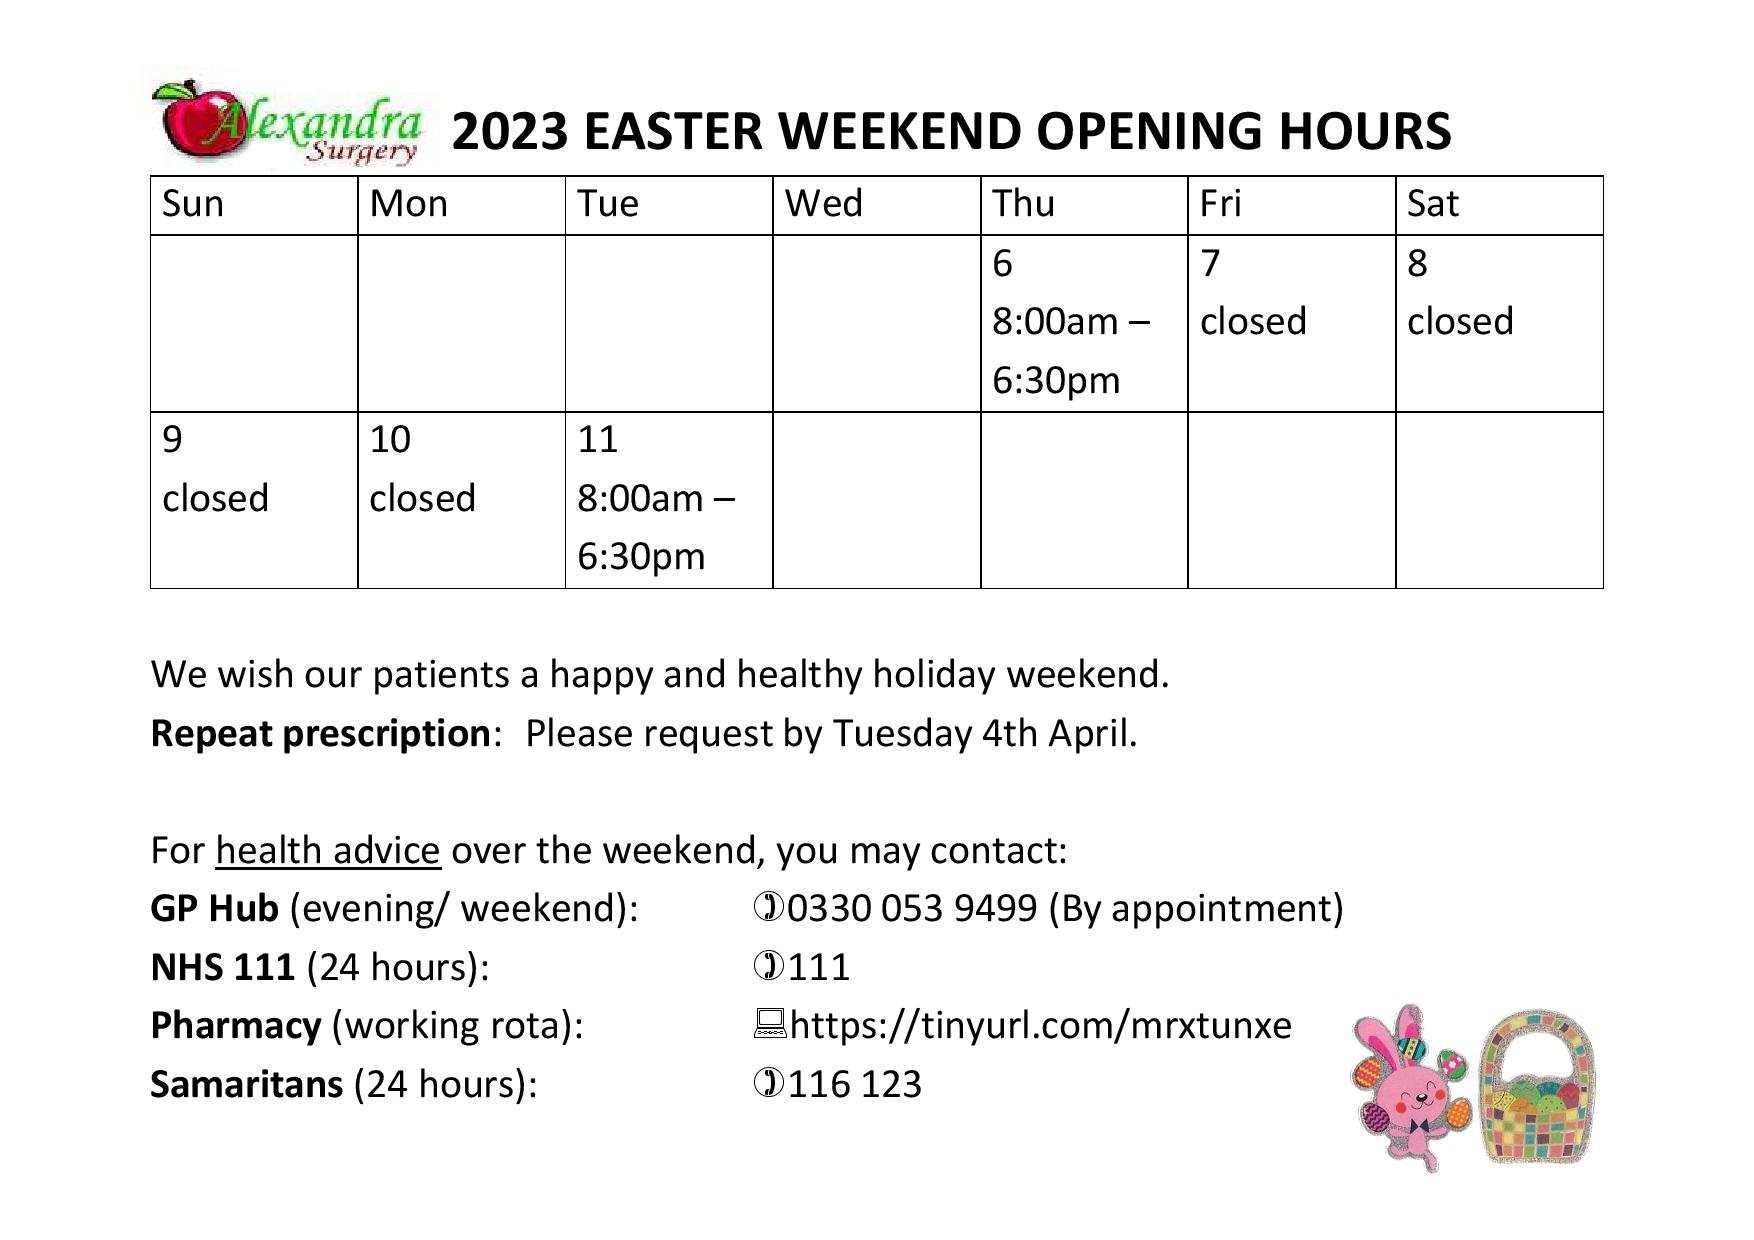 Easter opening hours 2023